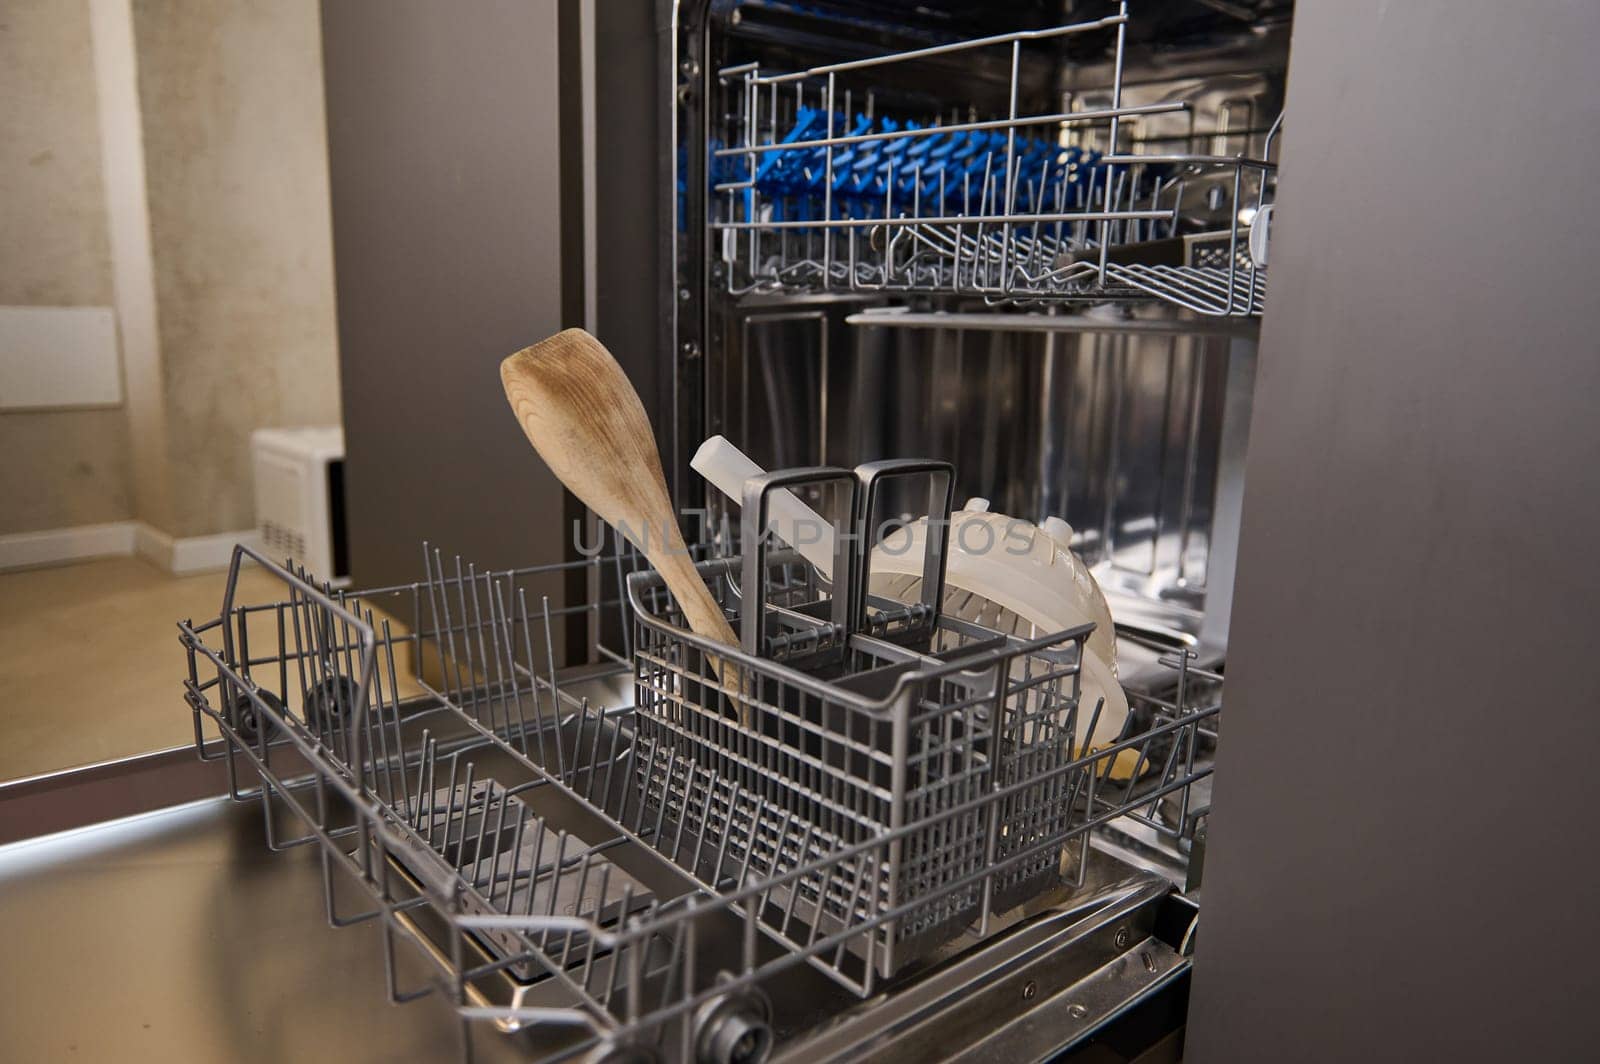 Close-up view of an open empty automatic dishwasher in kitchen. Modern kitchen appliance. Housekeeping equipment, Household chores.